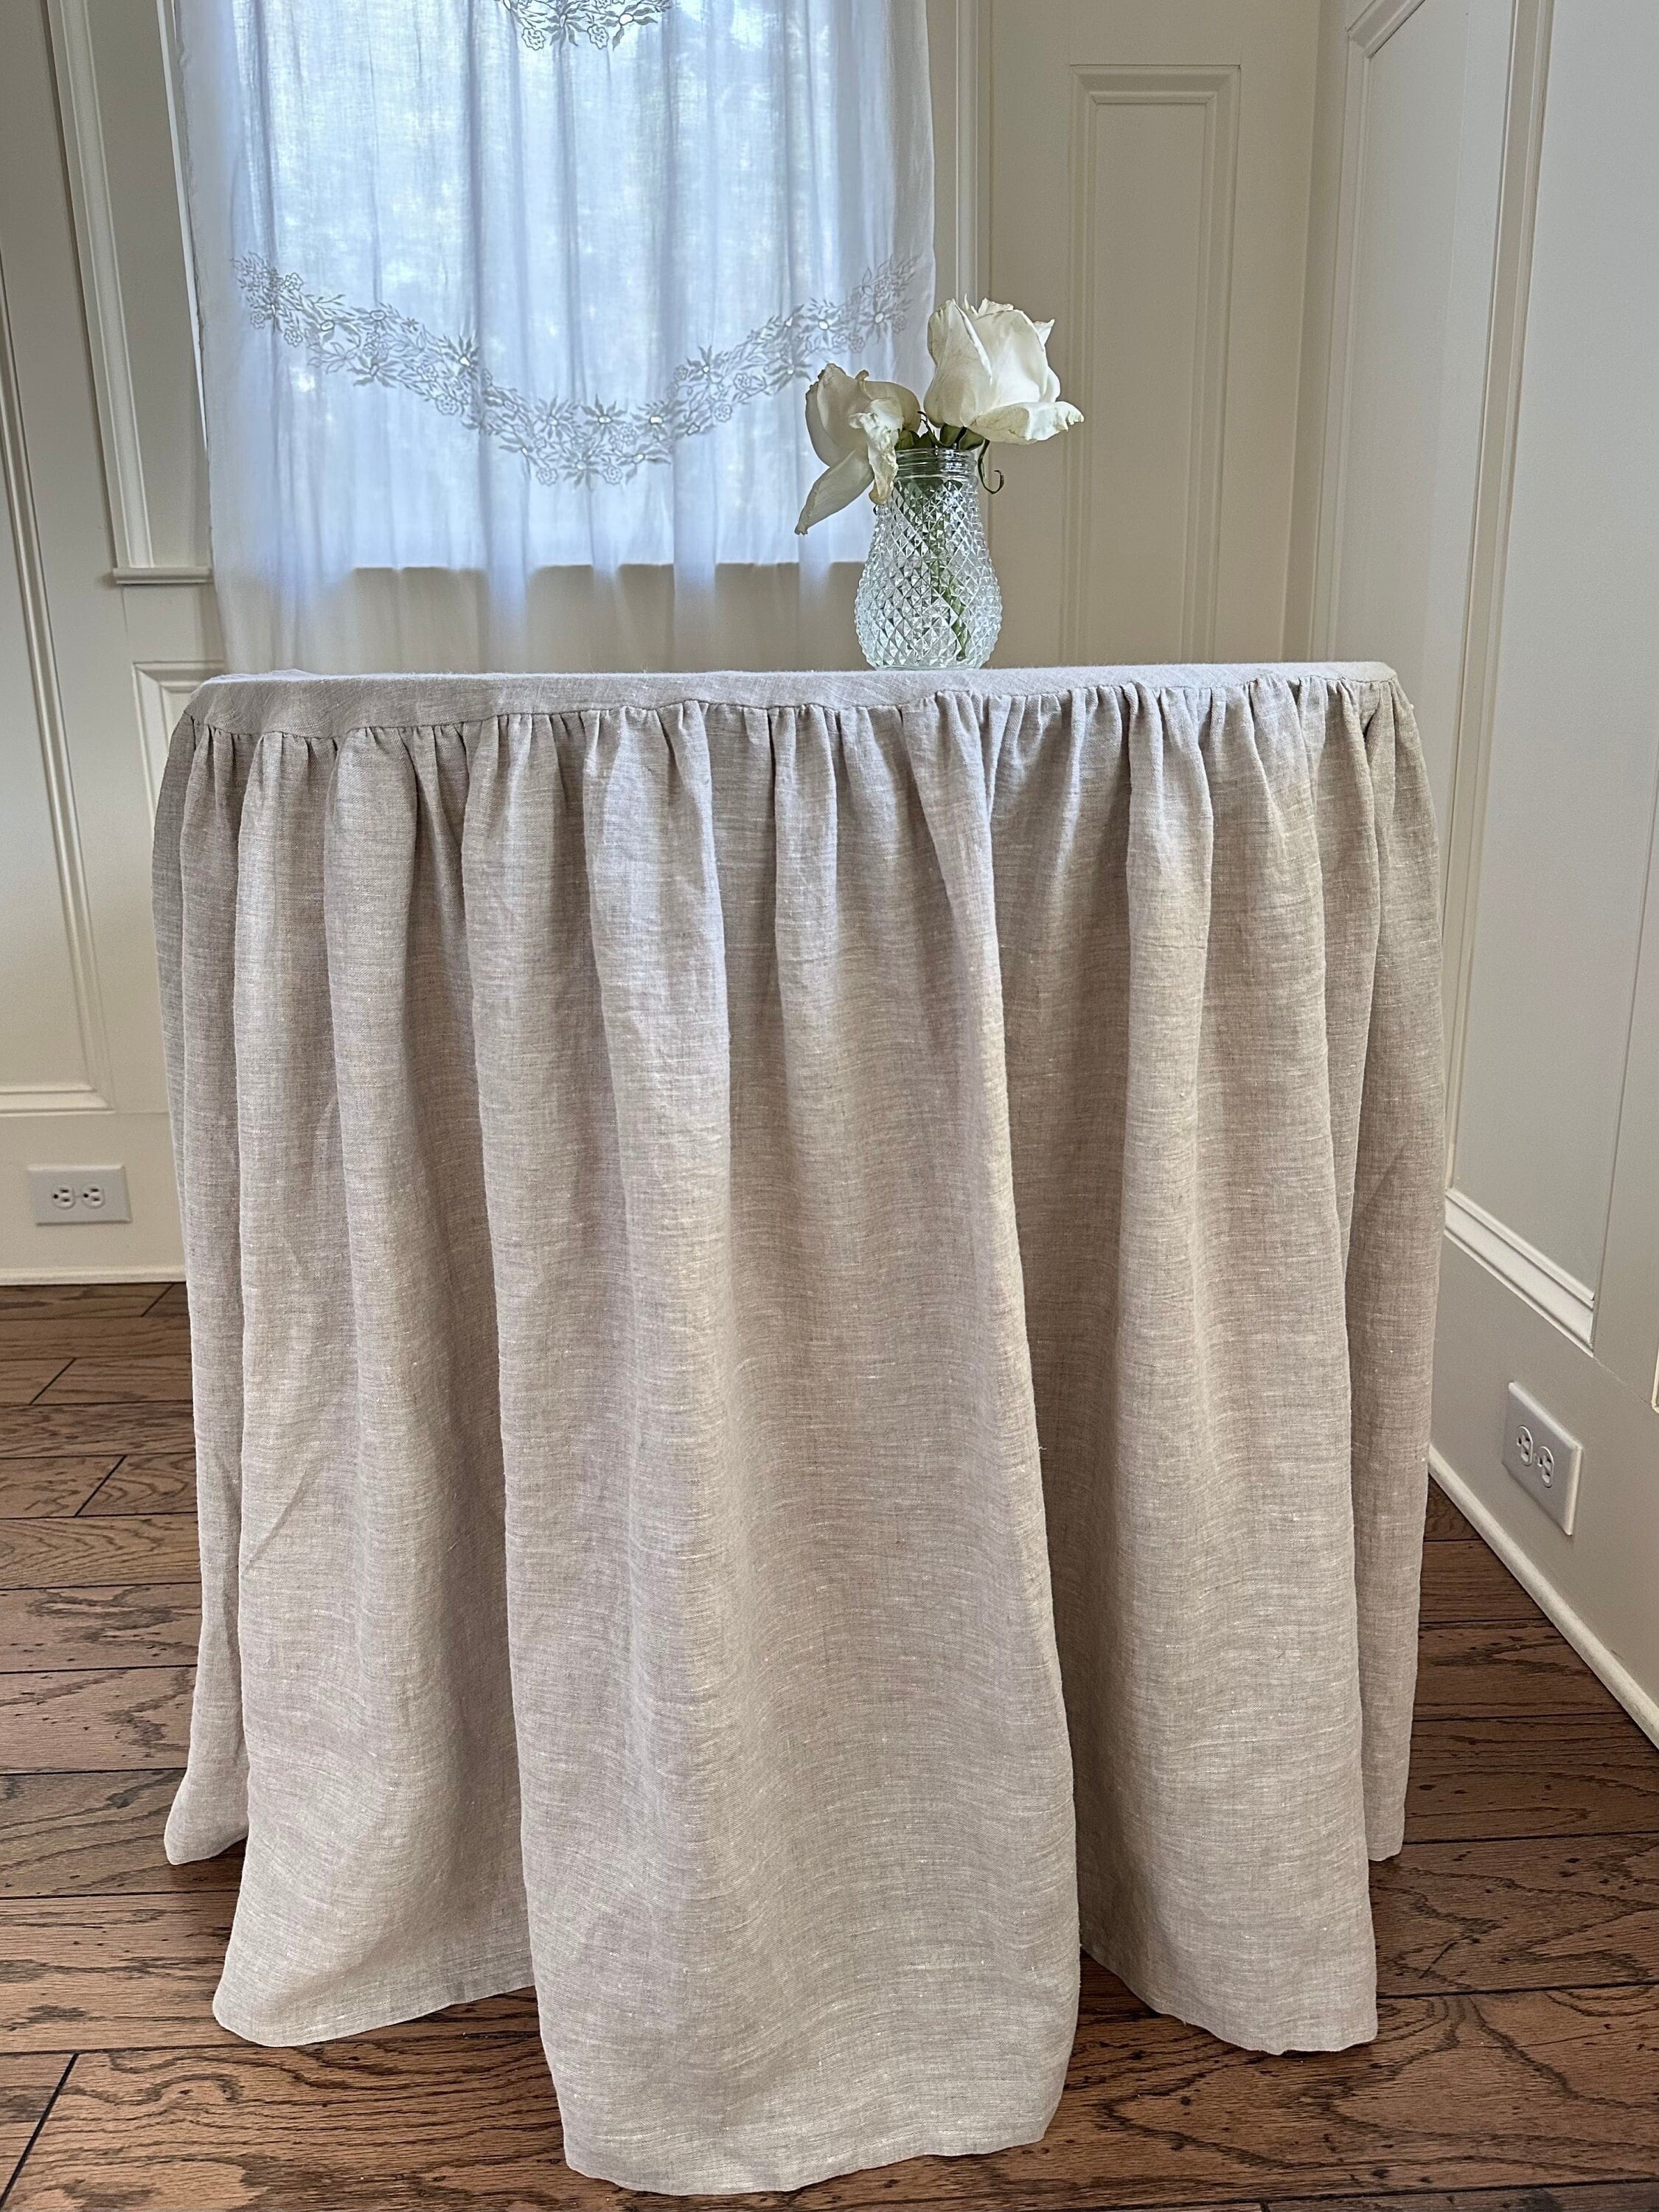  BLUEKATE Grey Silver Table Skirt. 9ft Table Skirt with